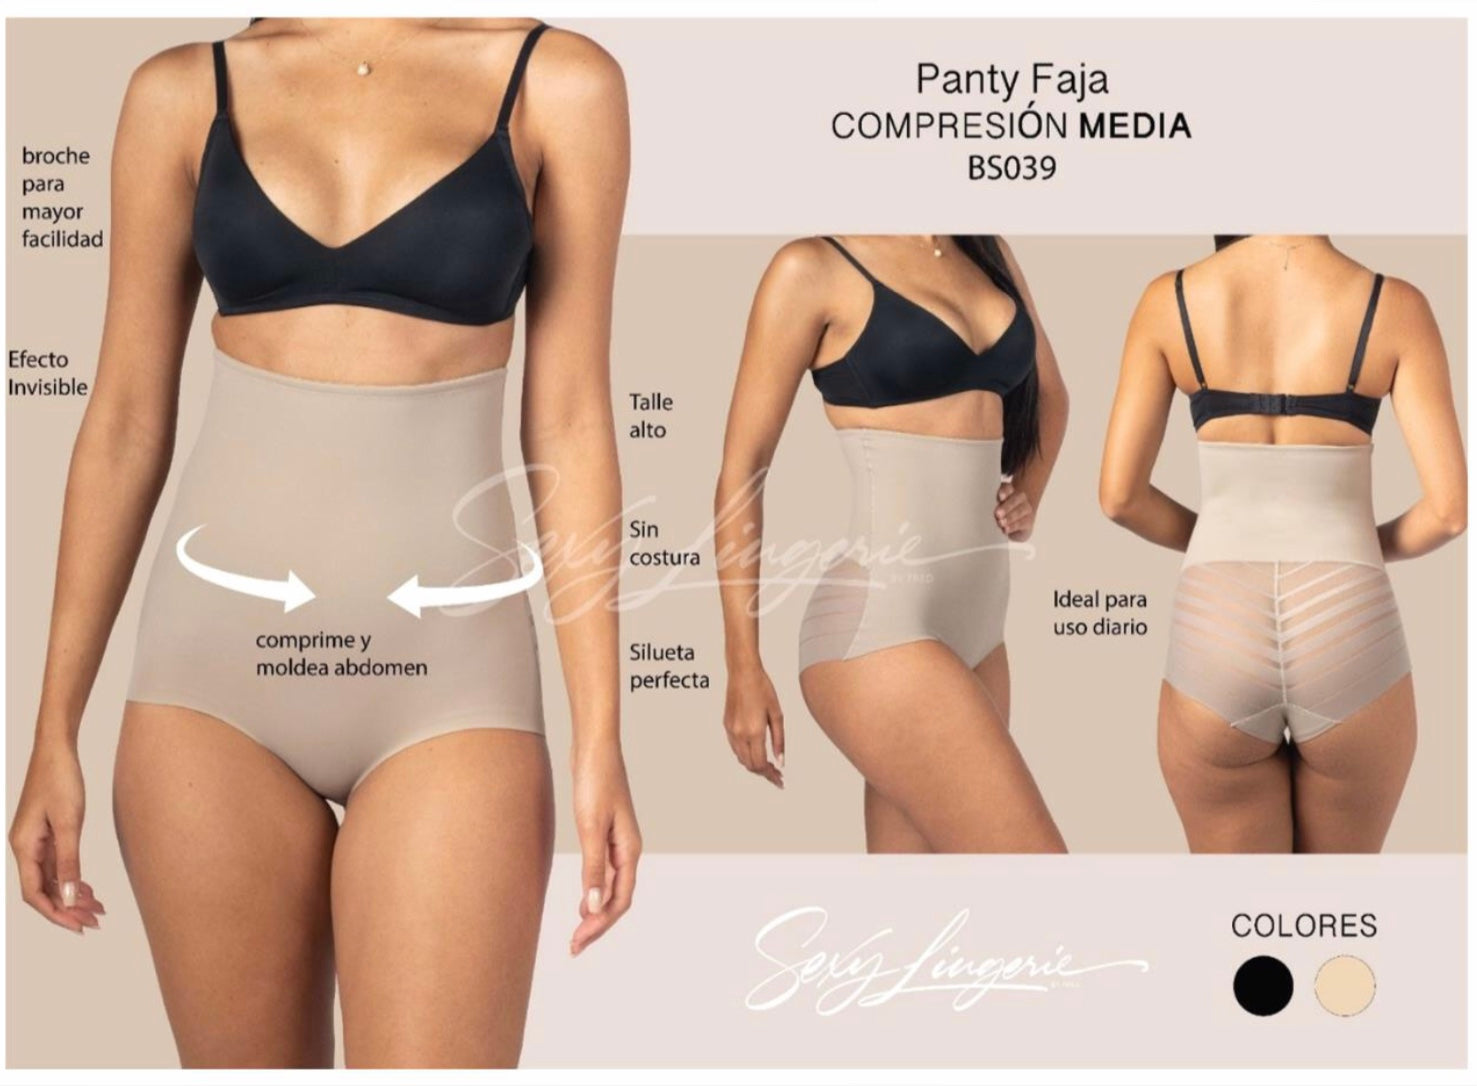 Sexy Columbian Reversible Hourglass Girdle Faja with Adjustable Smart Compression Shape Contouring Fabric